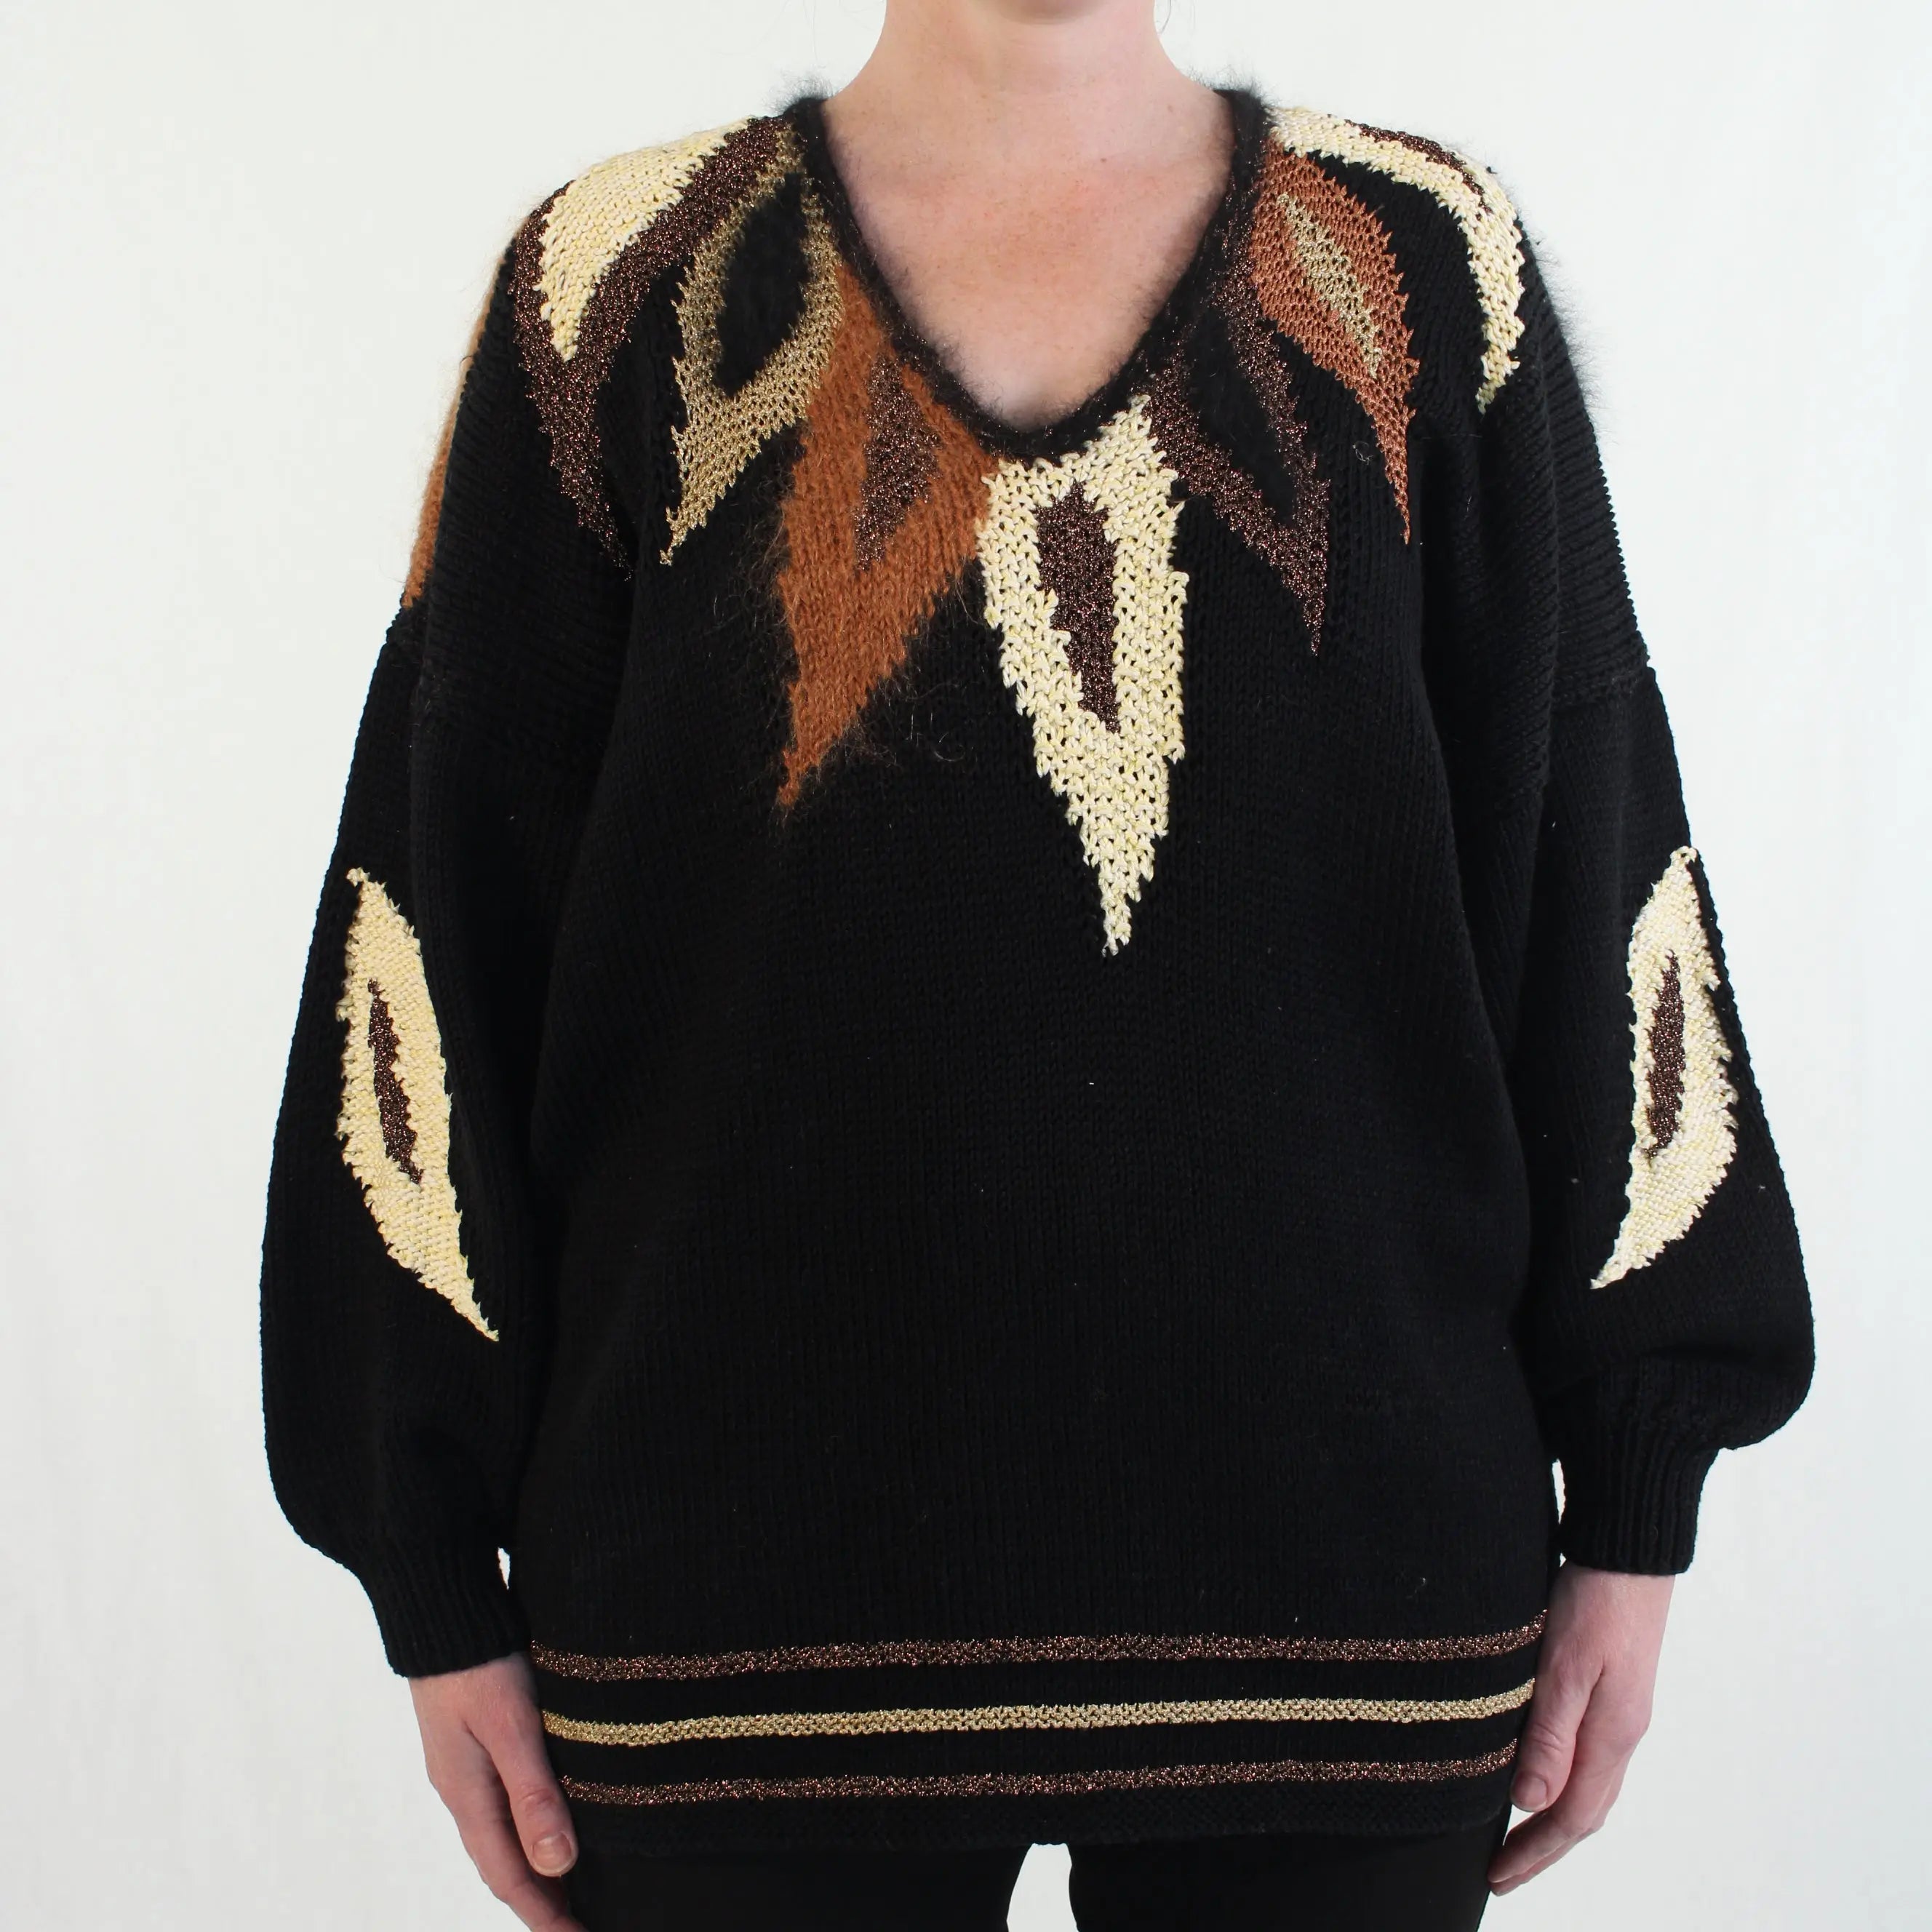 Unknown - Heavy Knitted Jumper- ThriftTale.com - Vintage and second handclothing